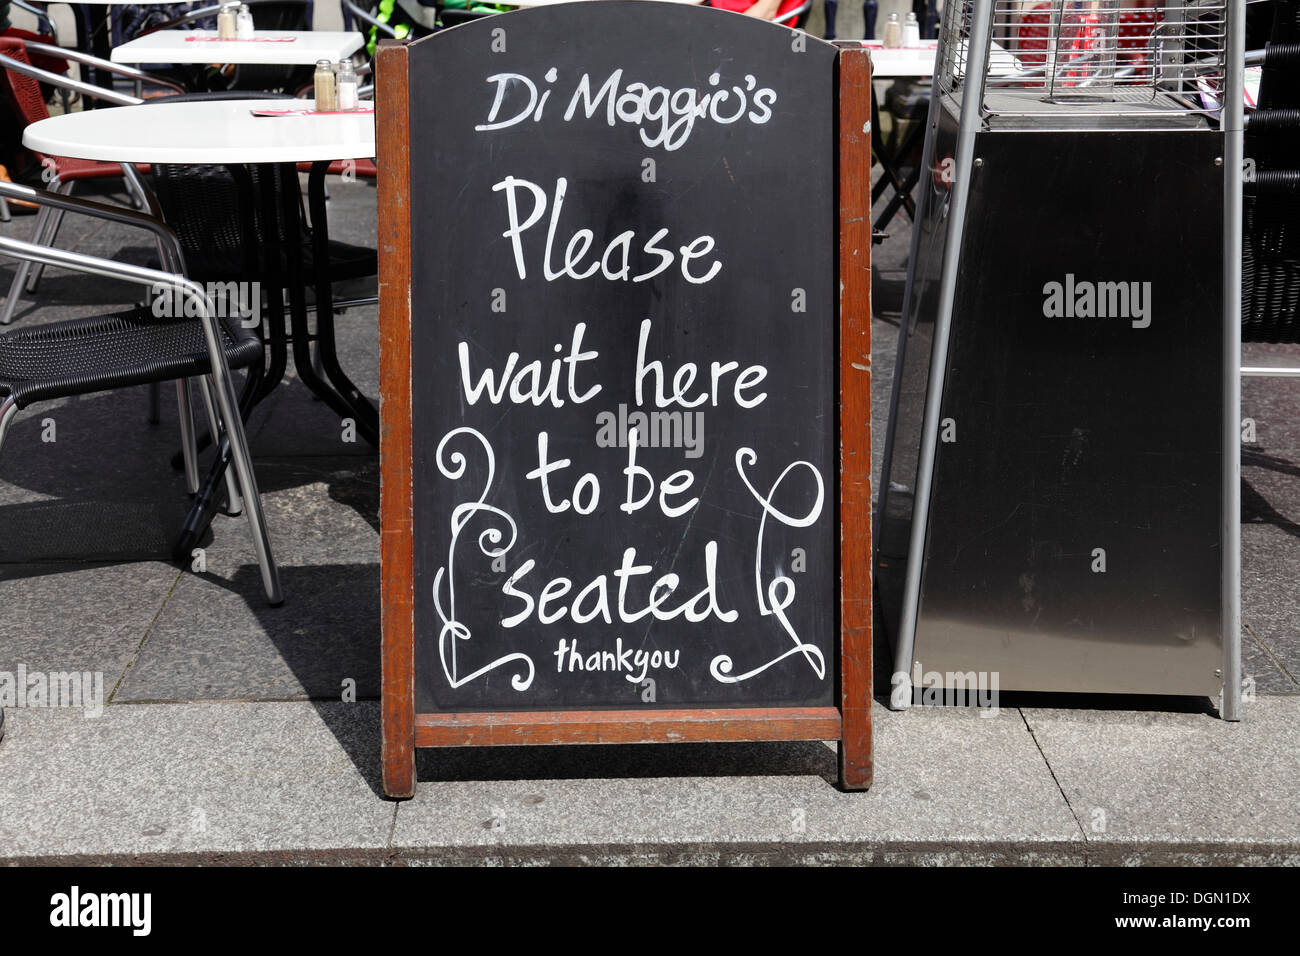 Sign for Di Maggio's outdoor seating area, UK Stock Photo